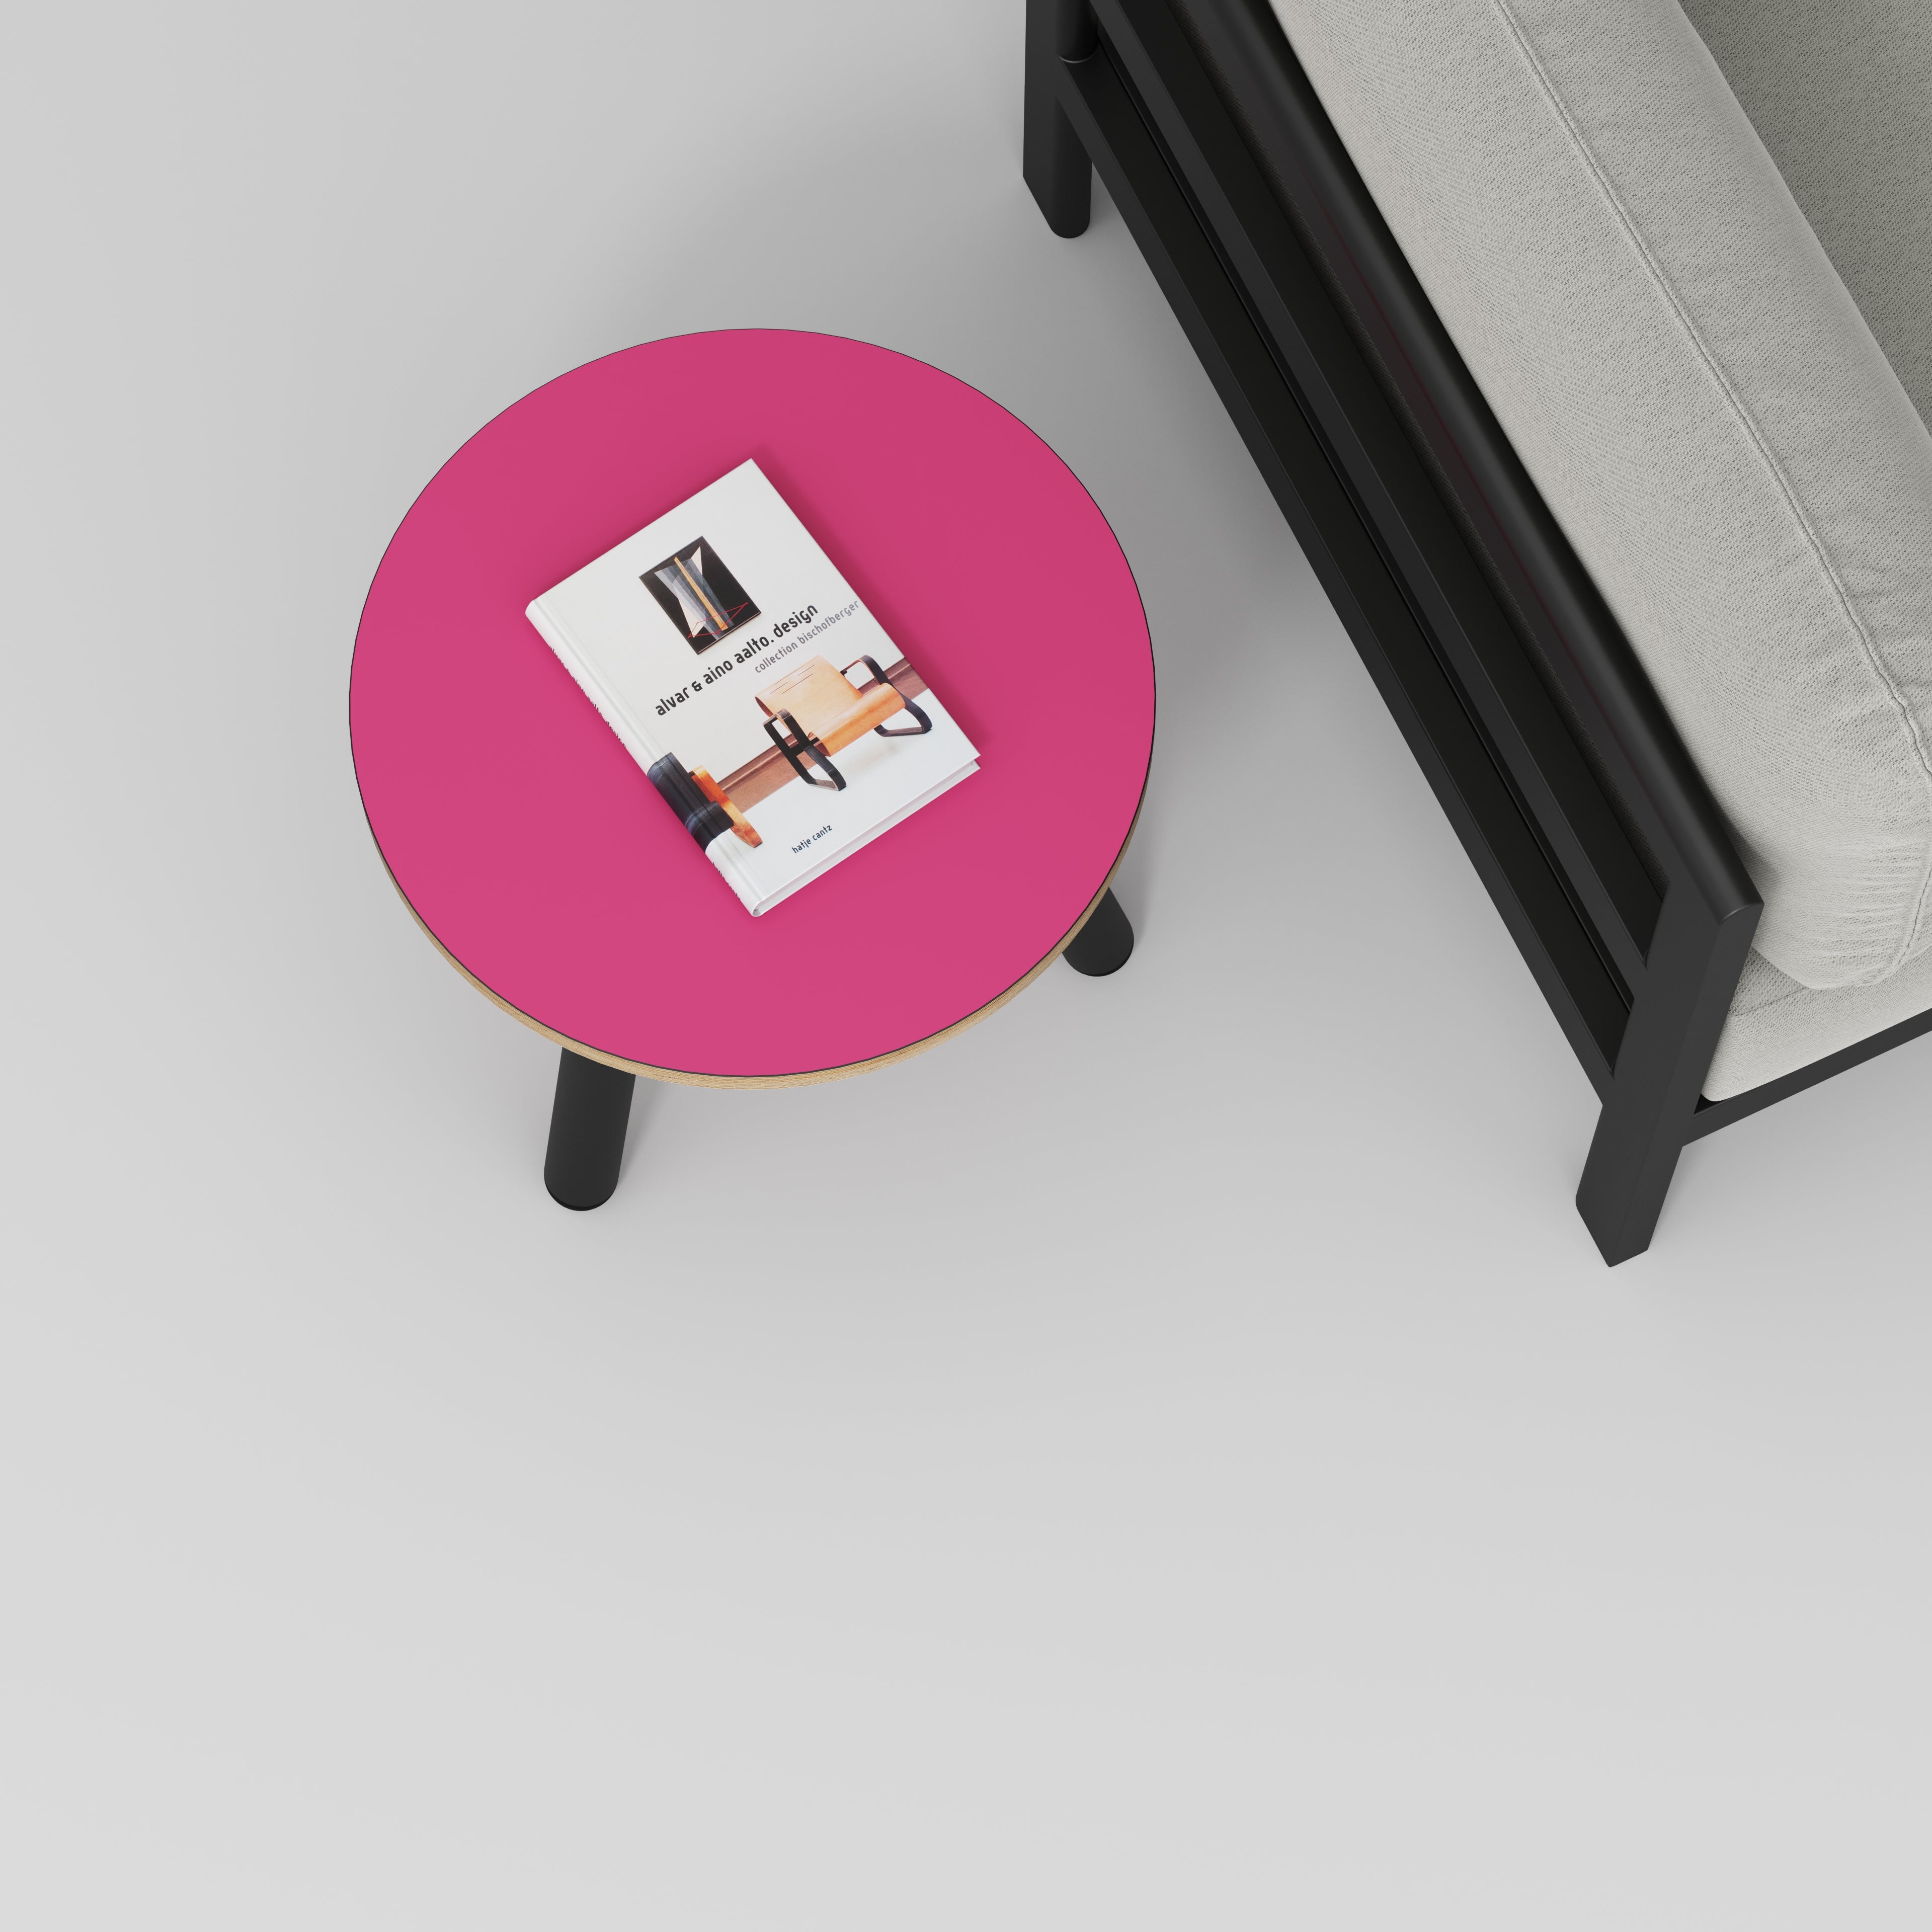 Round Side Table with Black Round Single Pin Legs - Formica Juicy Pink - 500(w) x 500(d) x 425(h)